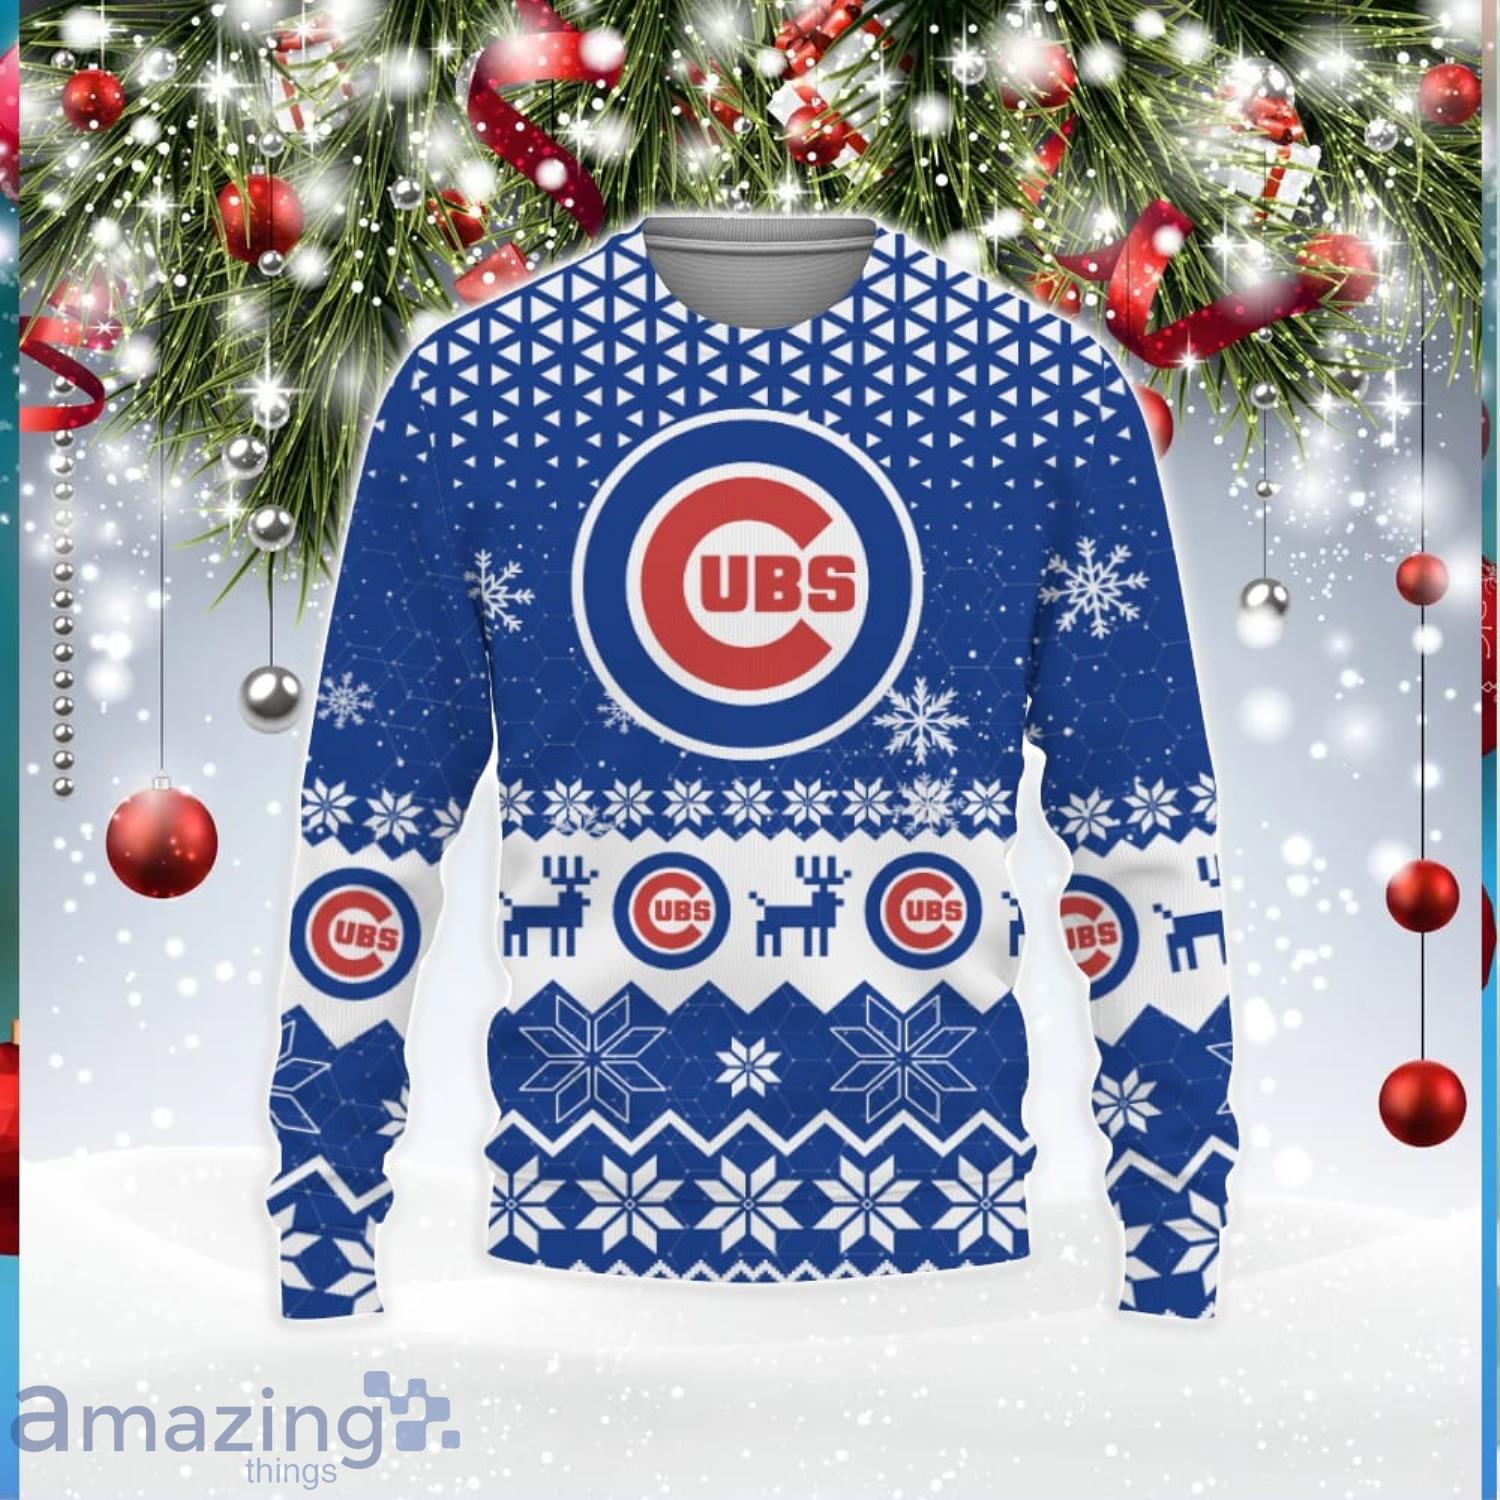 For Fans Chicago Cubs Mickey Mouse Lover Ugly Christmas Sweater Christmas  Gift